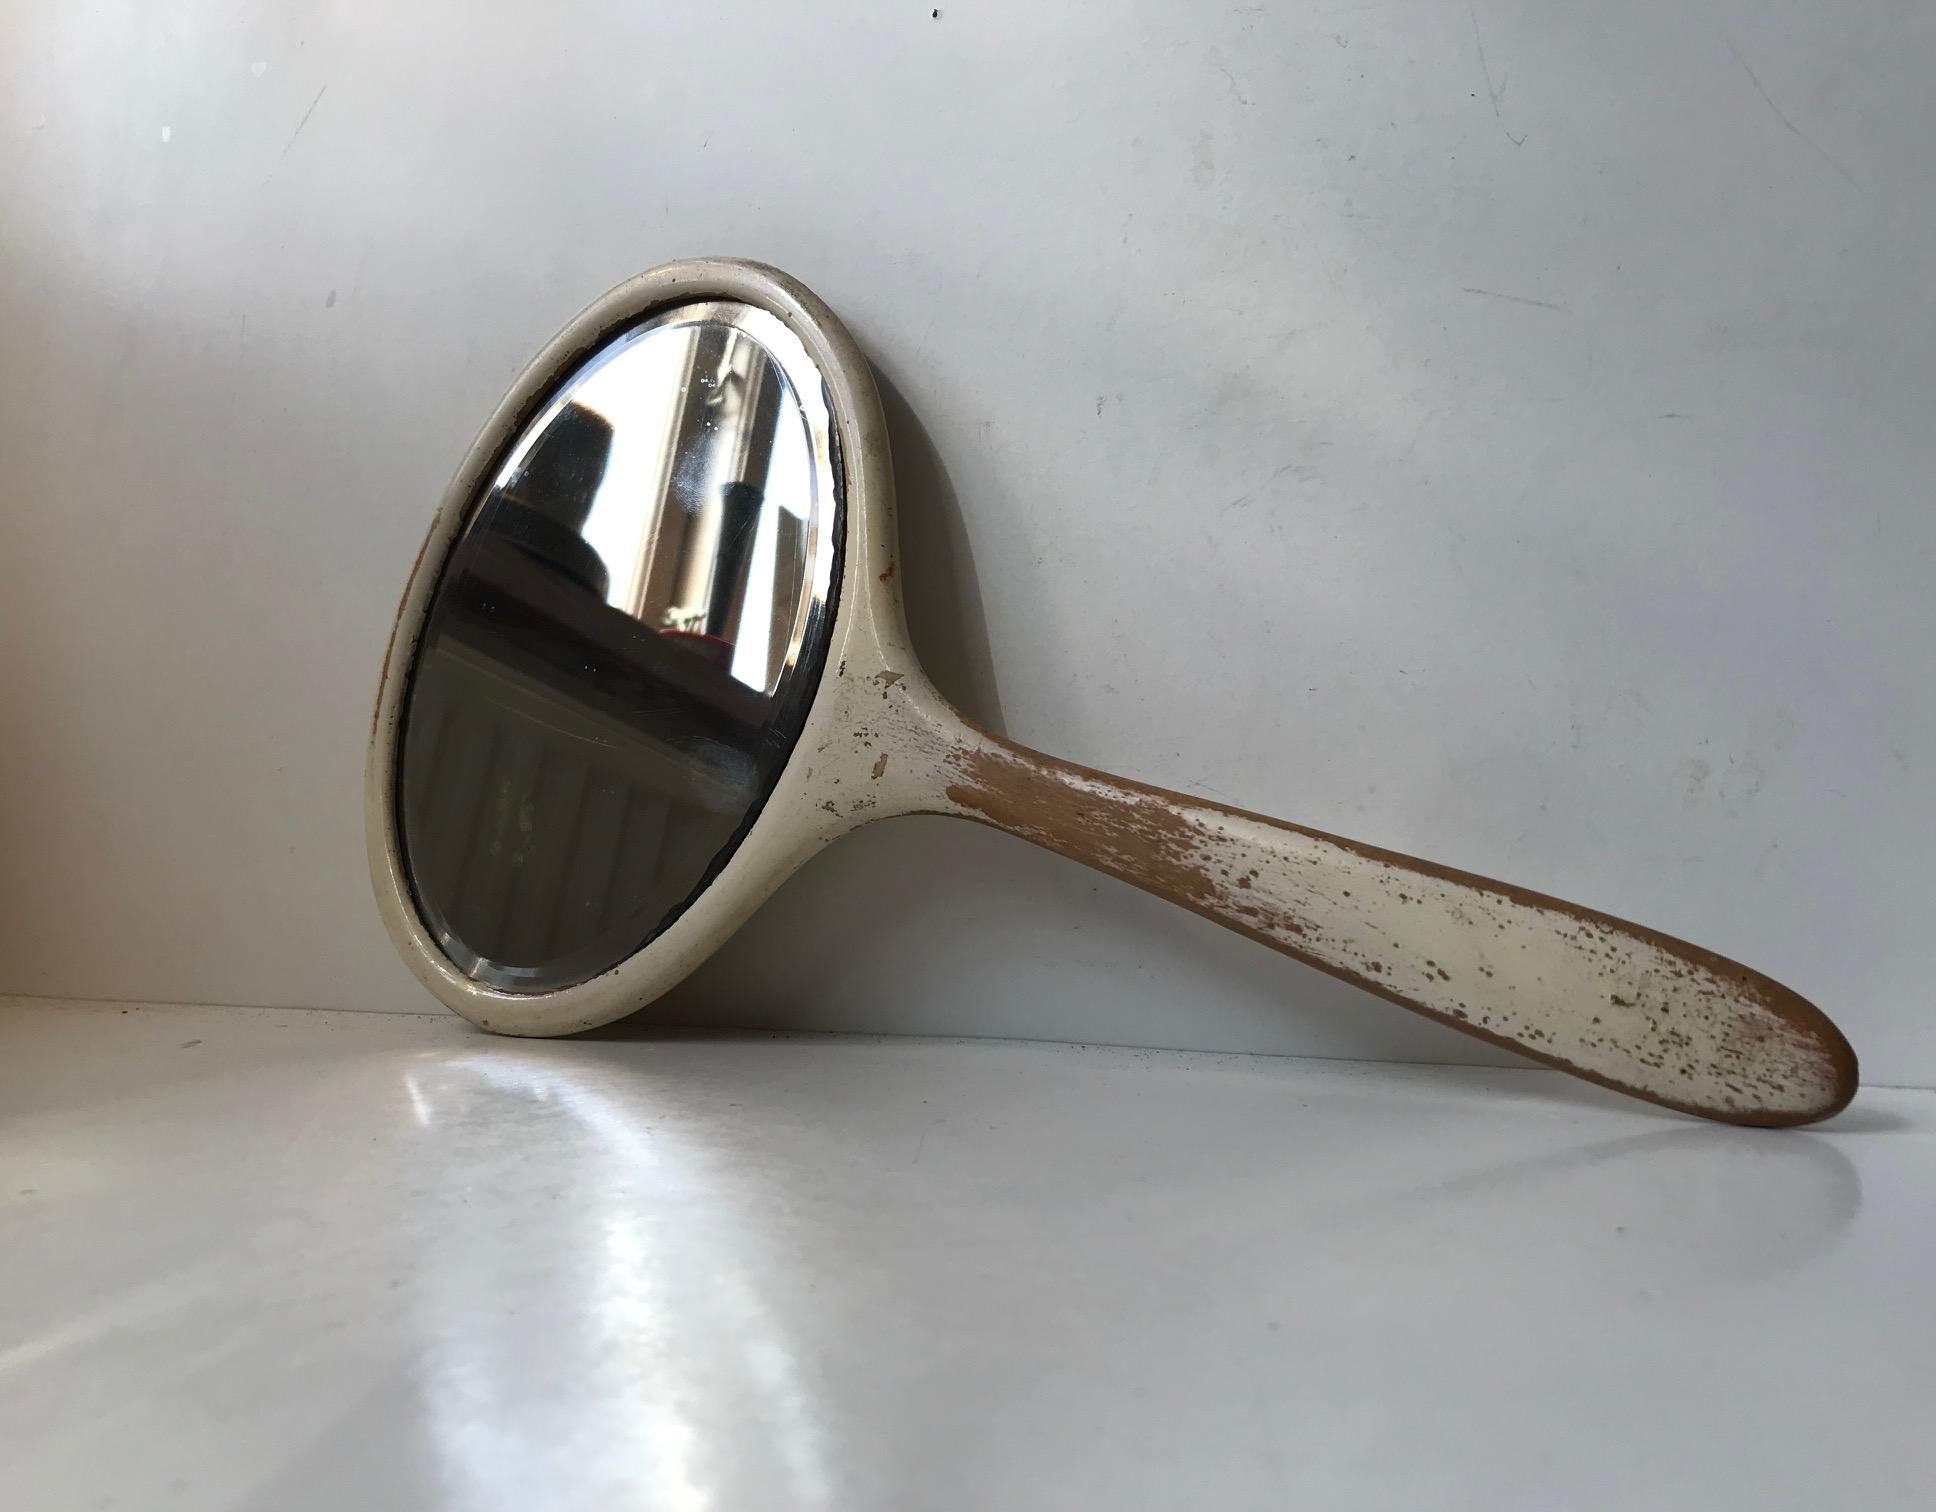 Antique European hand held vanity mirror in lacquered cherrywood and with faceted original mirror glass. Authentic patina and ware suitable for any shabby chic interior.